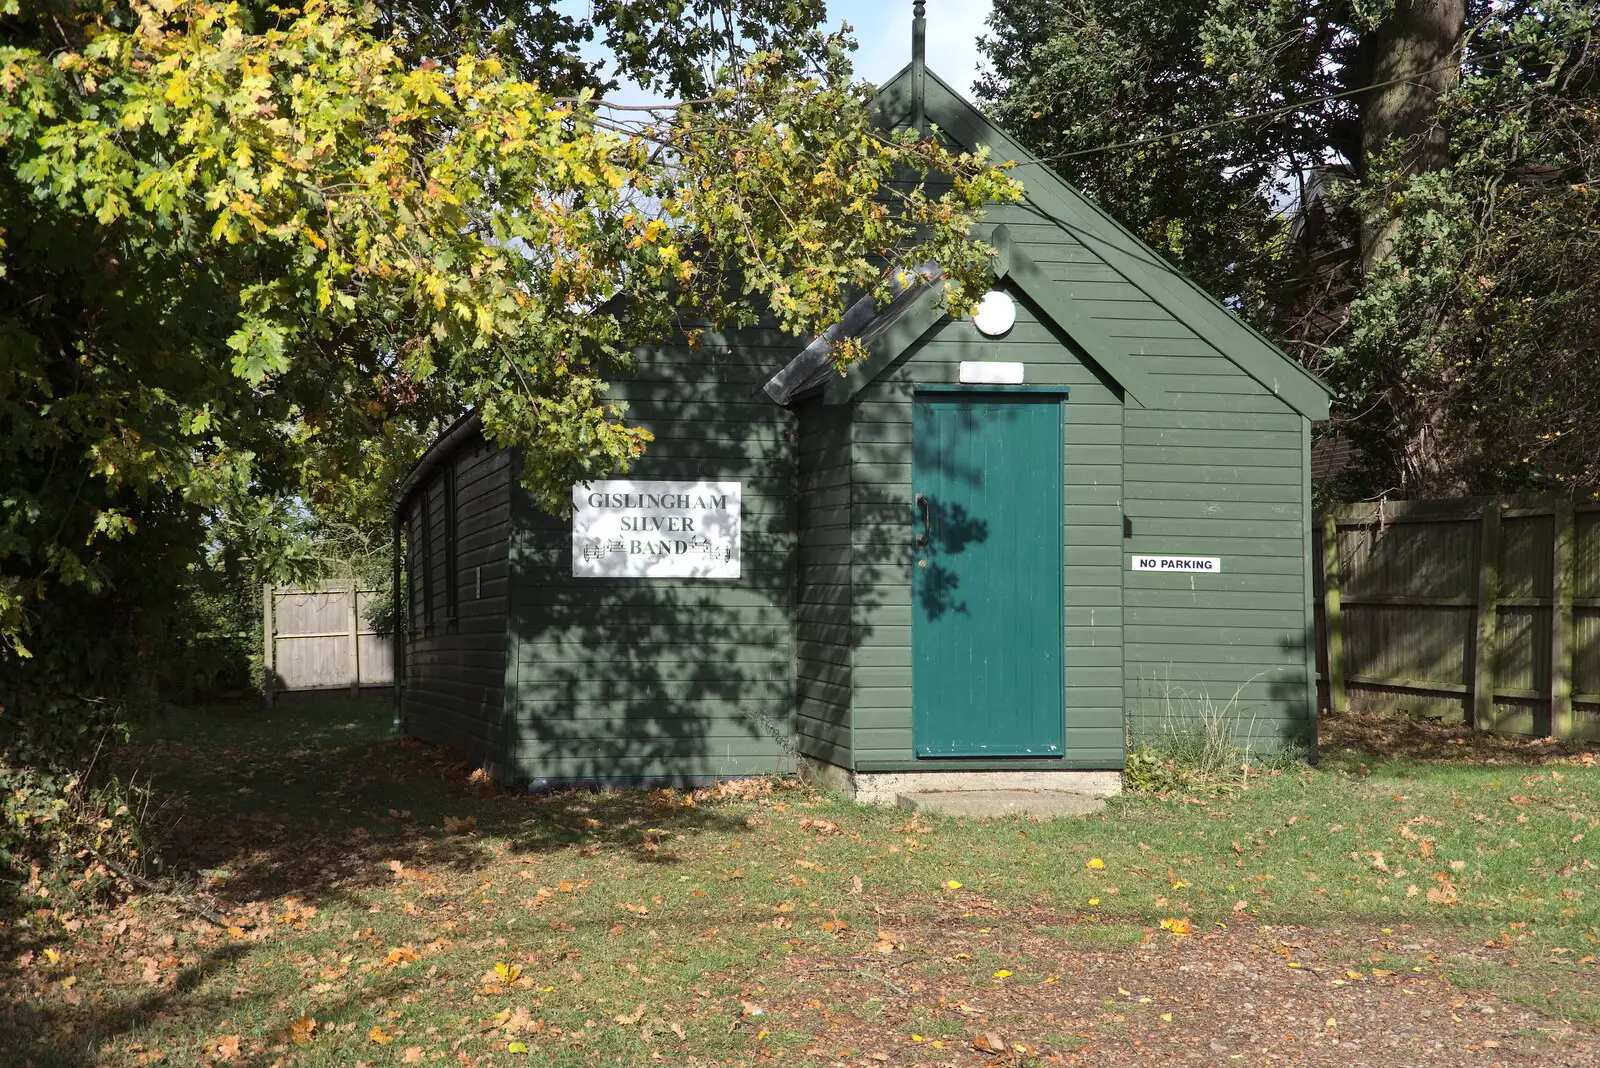 The band hut, surrounded by autumn trees, from A Few Hours at Alton Water, Stutton, Suffolk - 22nd October 2022